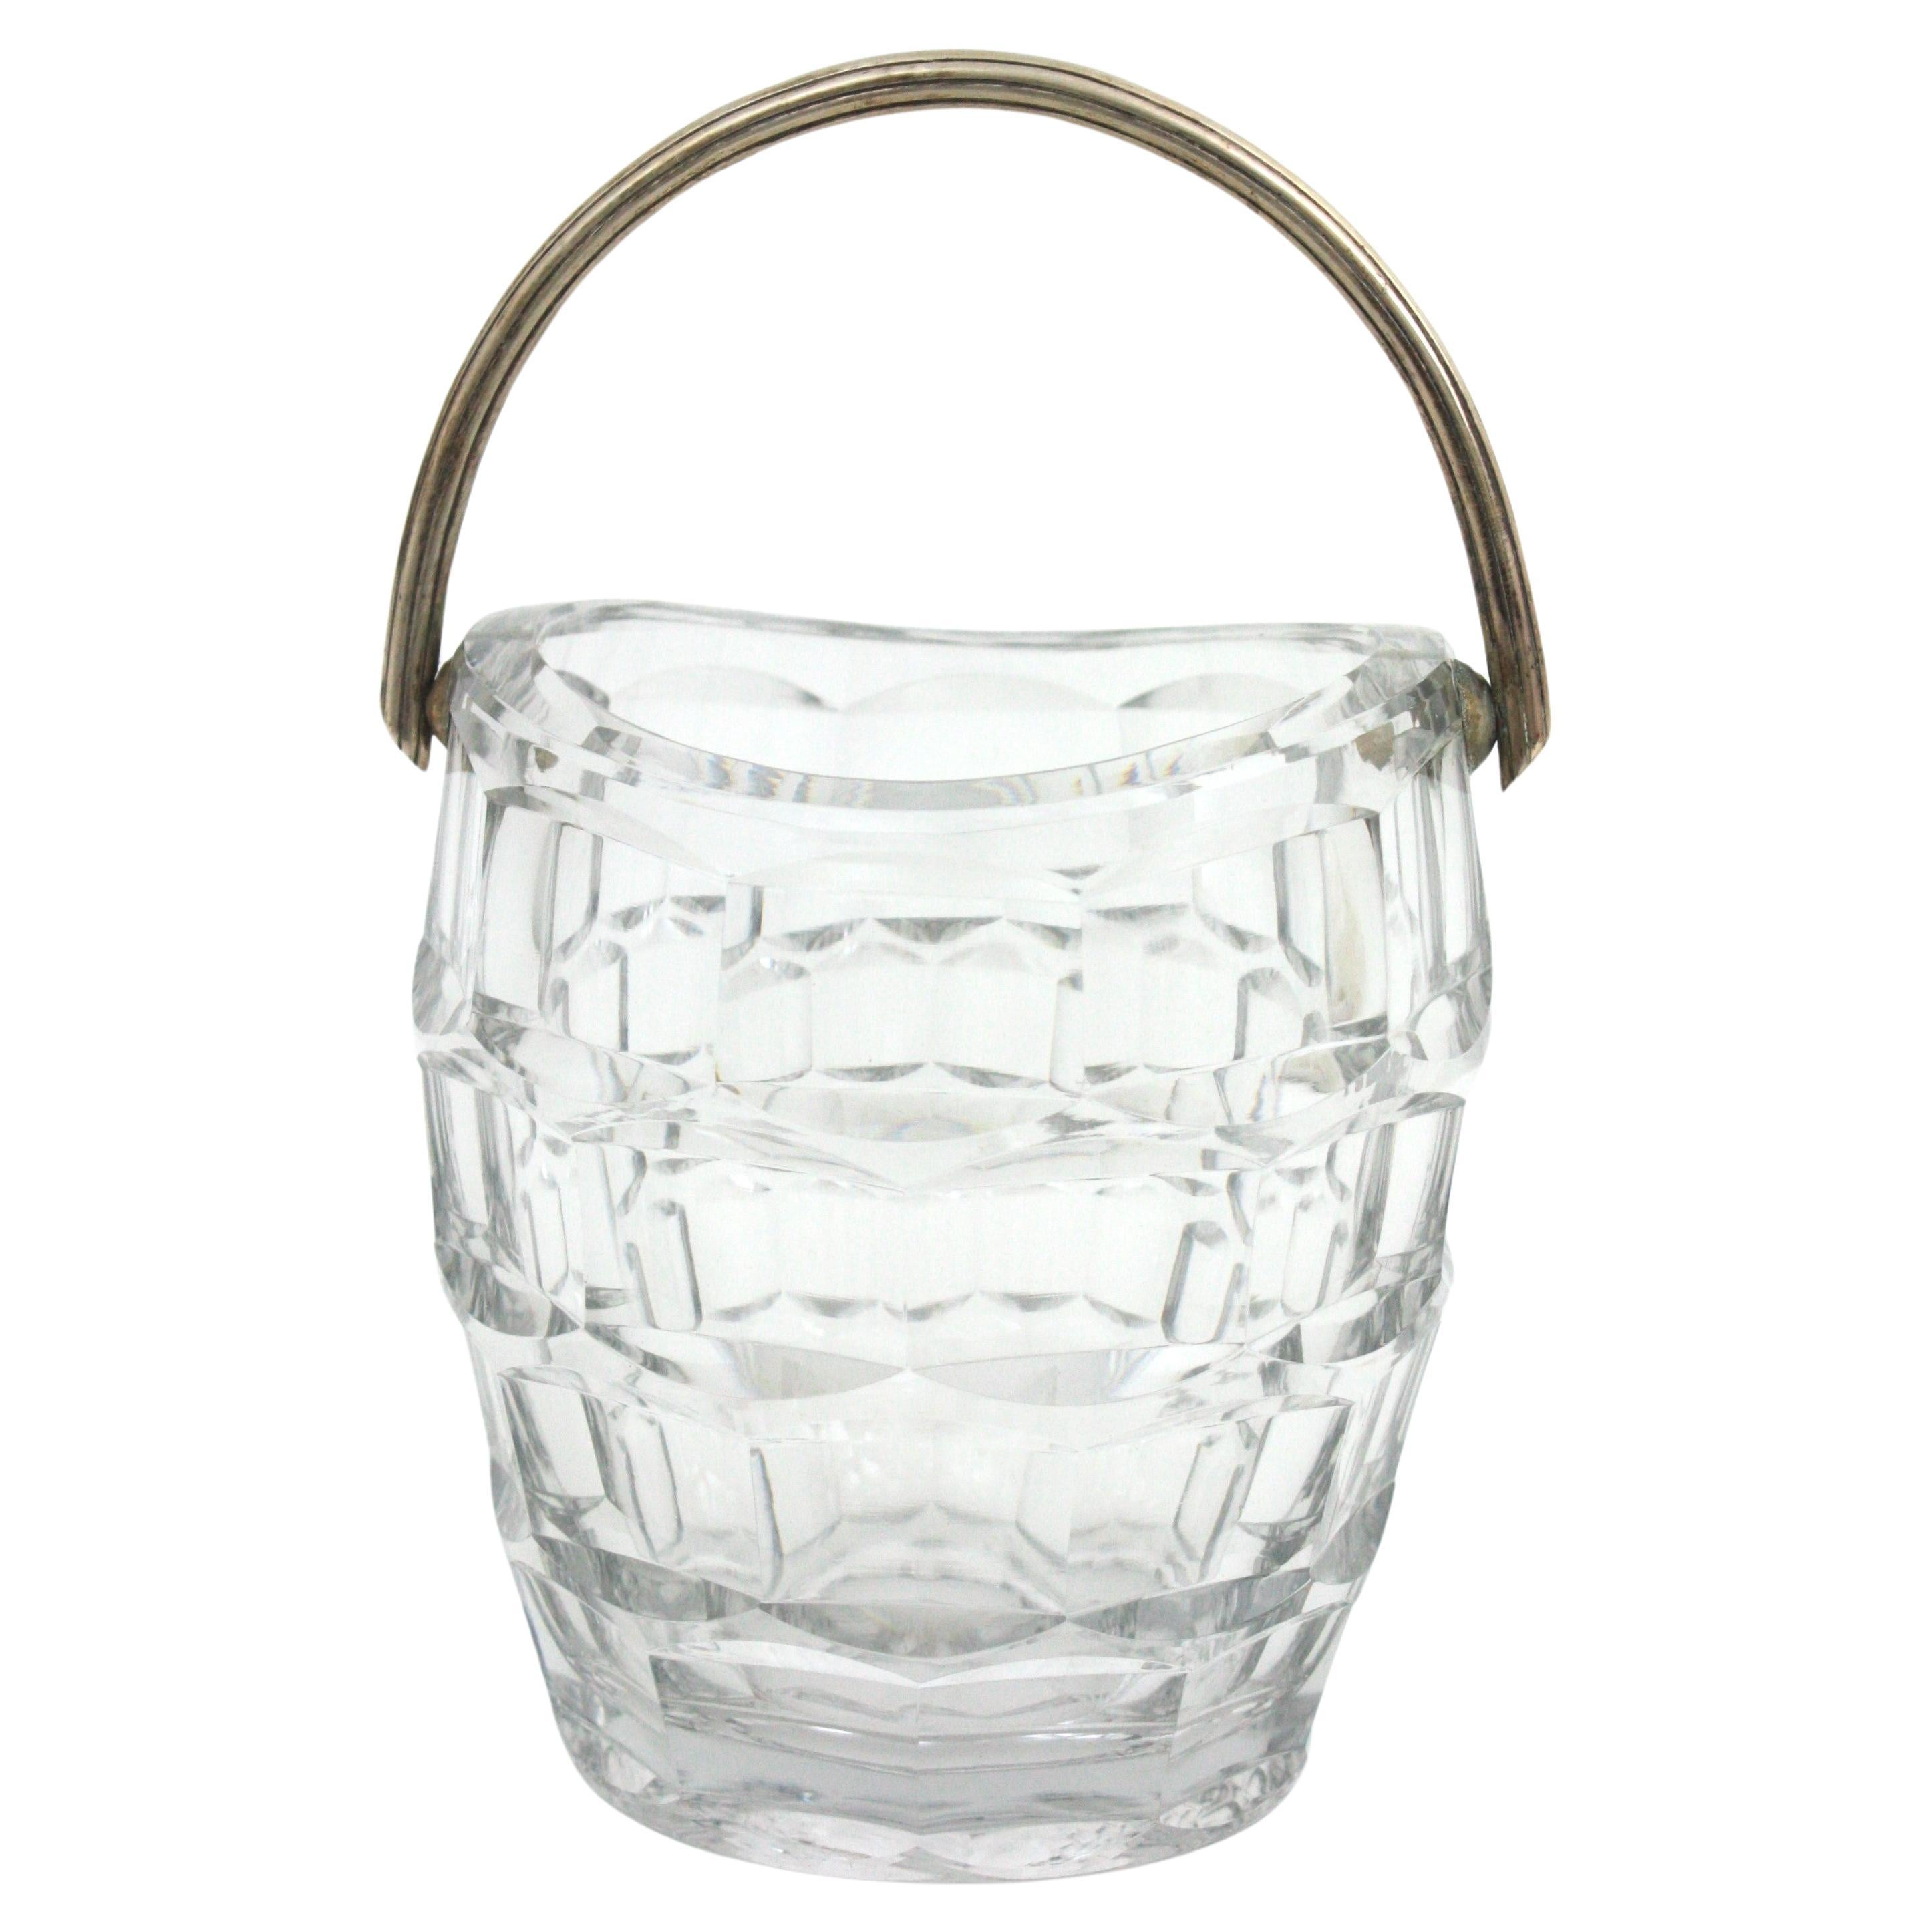 Baccarat Crystal and Sterling Silver Ice Bucket with single handle, France, 1950s
This ice bucket is comprised by a cut crystal container with sterling silver striped handle.
This sexy ice bucket will be a nice addition to your dinning table,